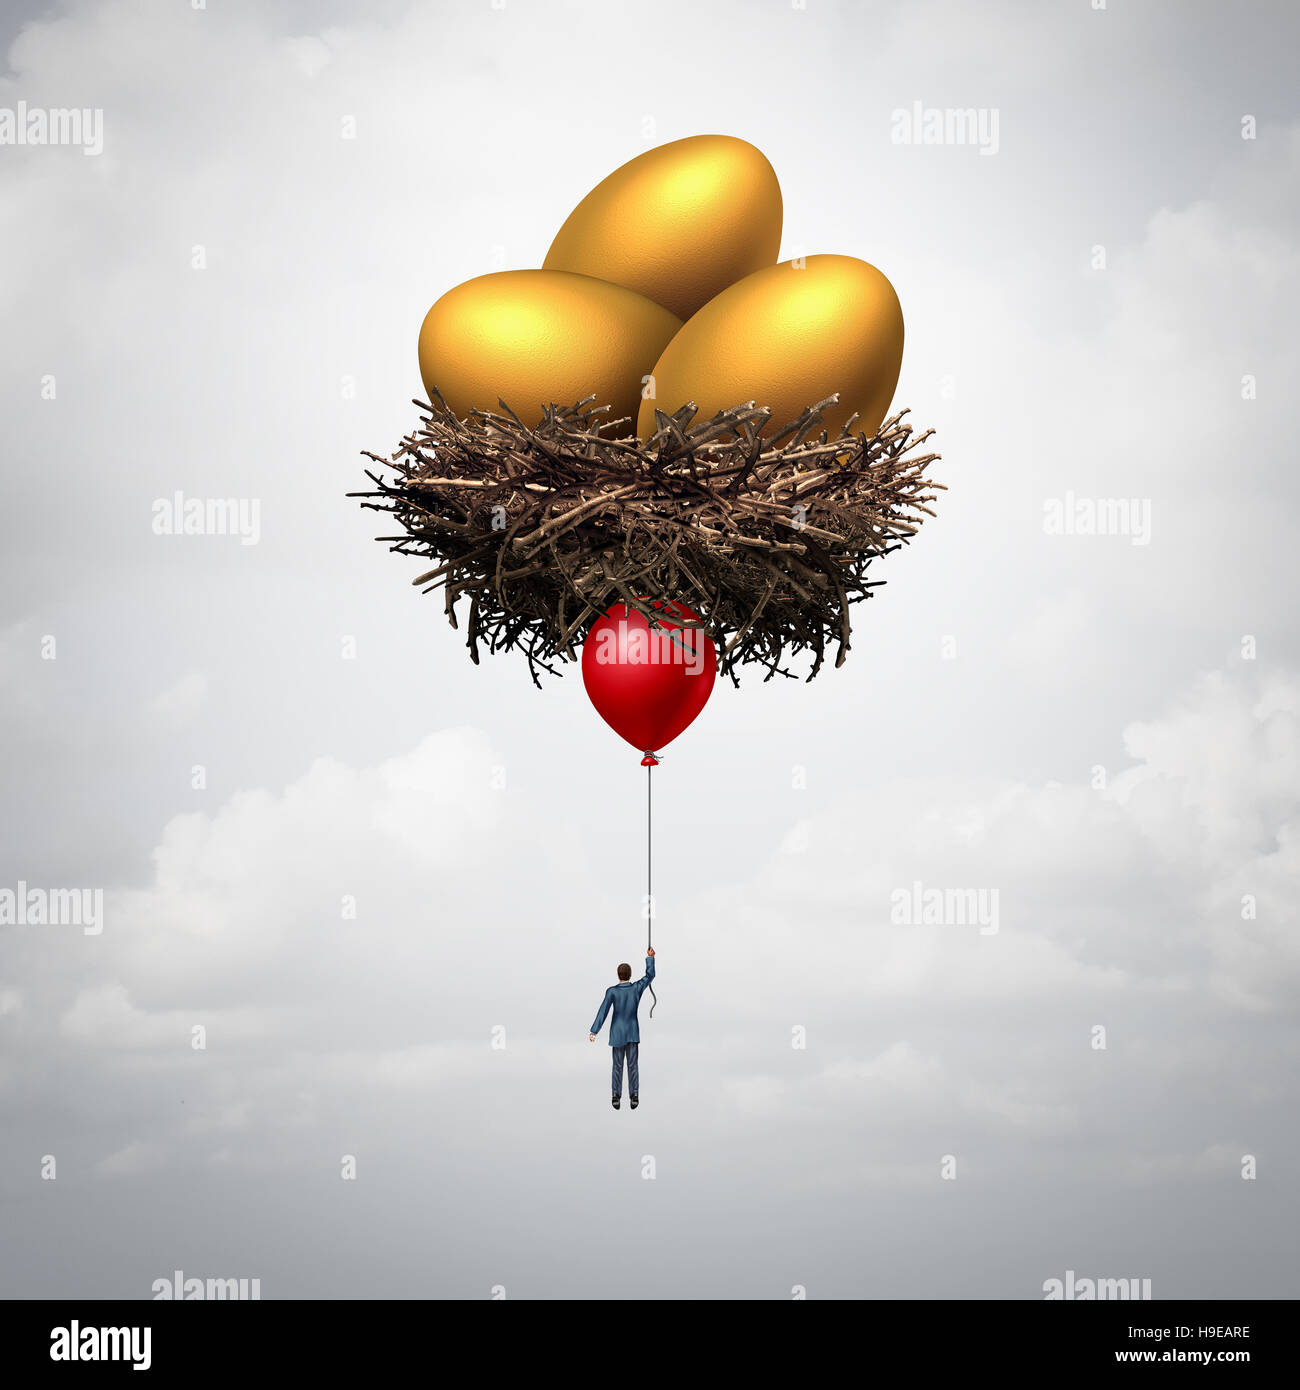 Wealth manager and financial adviser business concept as a retirement savings finance consultant or banking metaphor with 3D illustration elements. Stock Photo